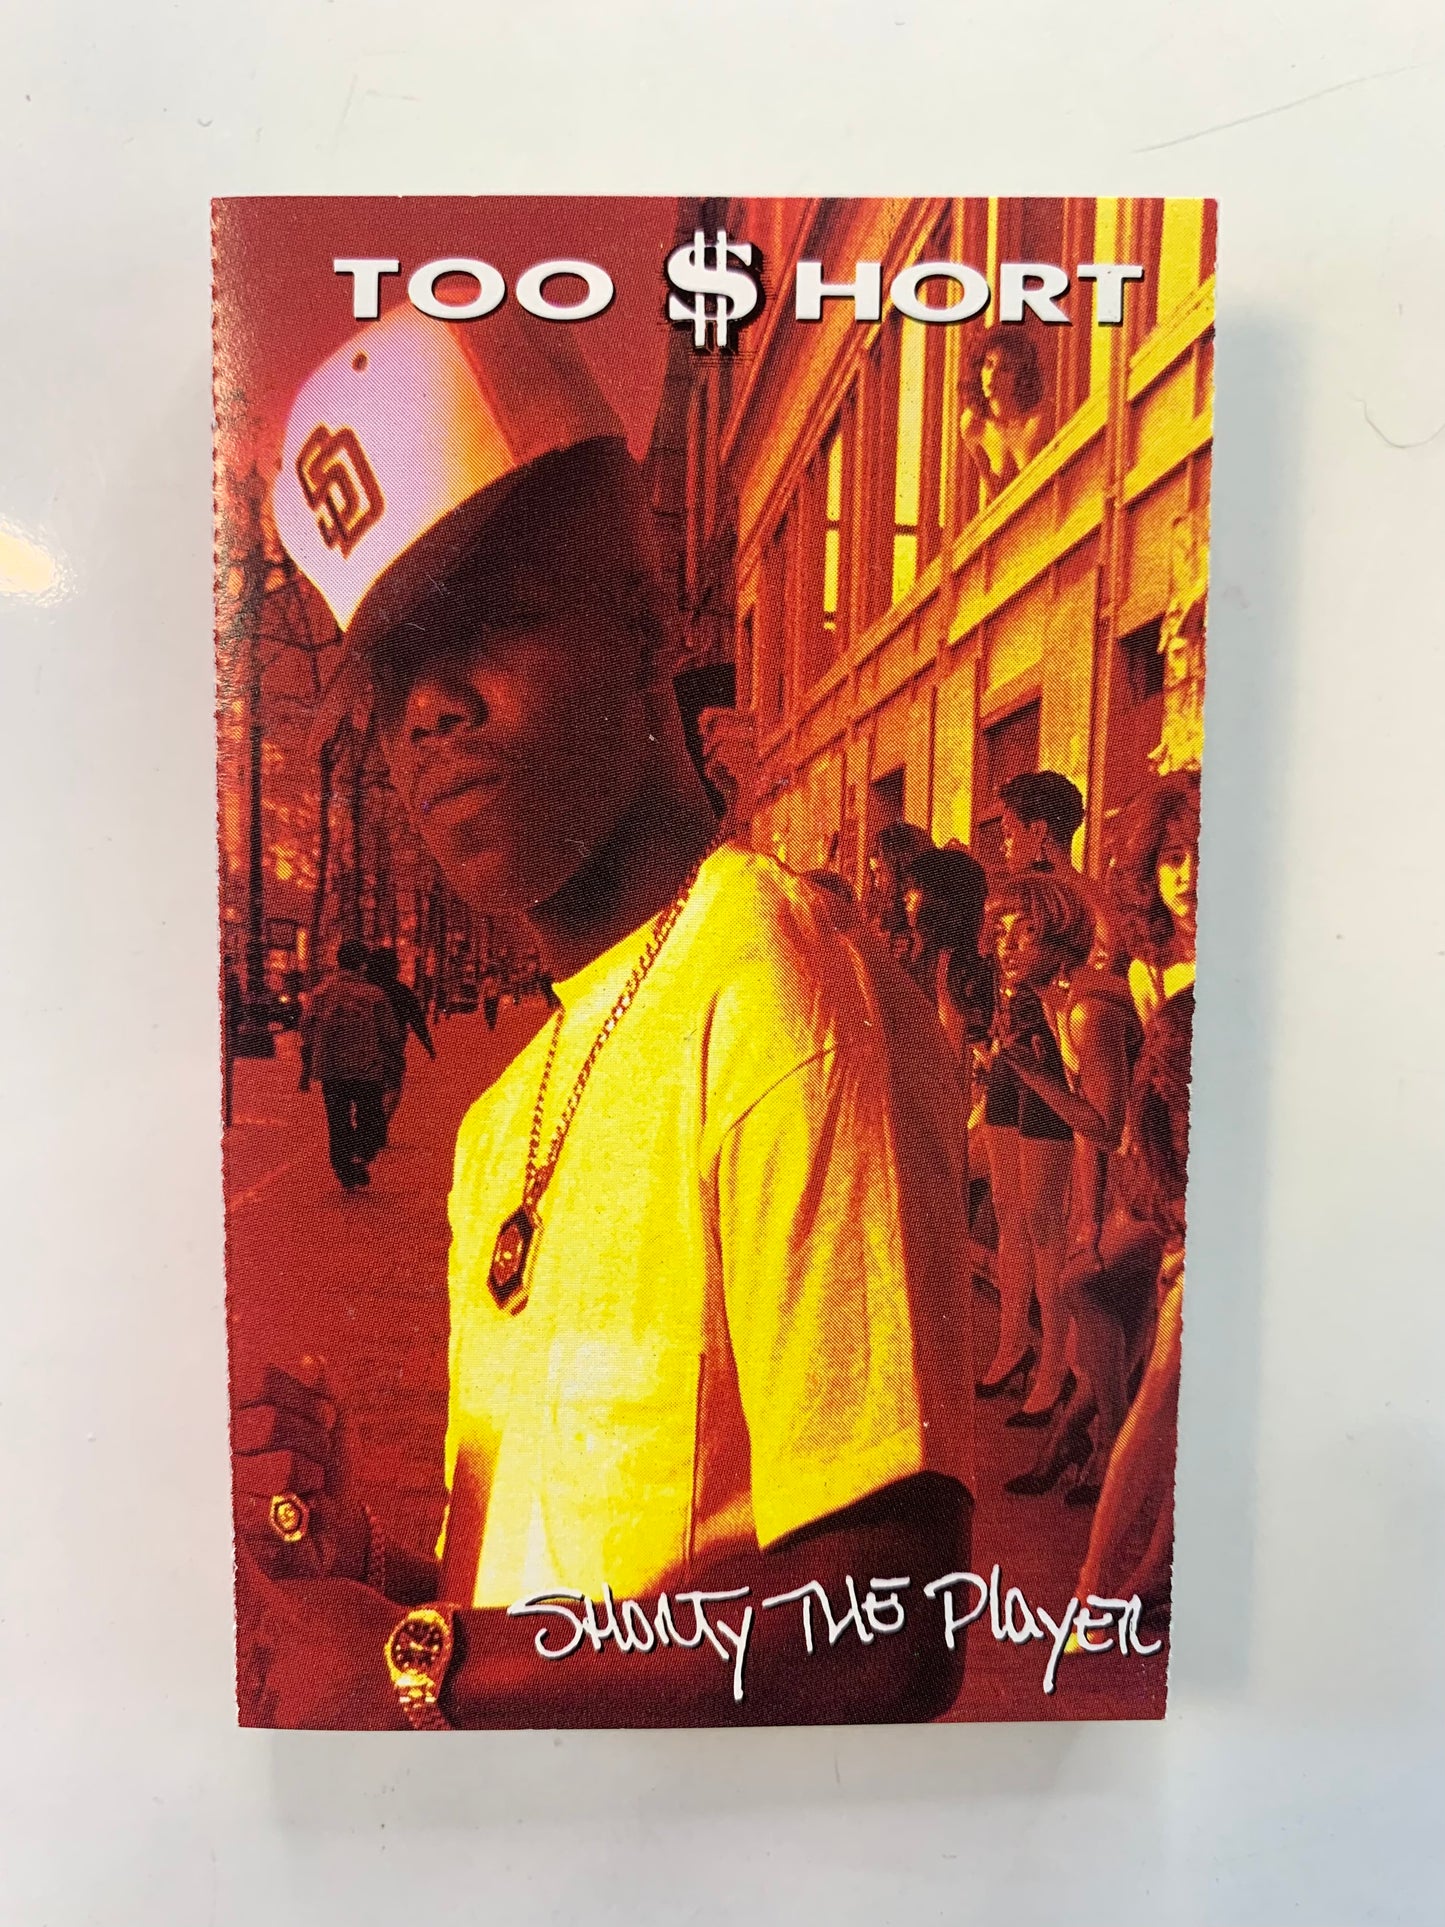 Too Short, Shorty The Player